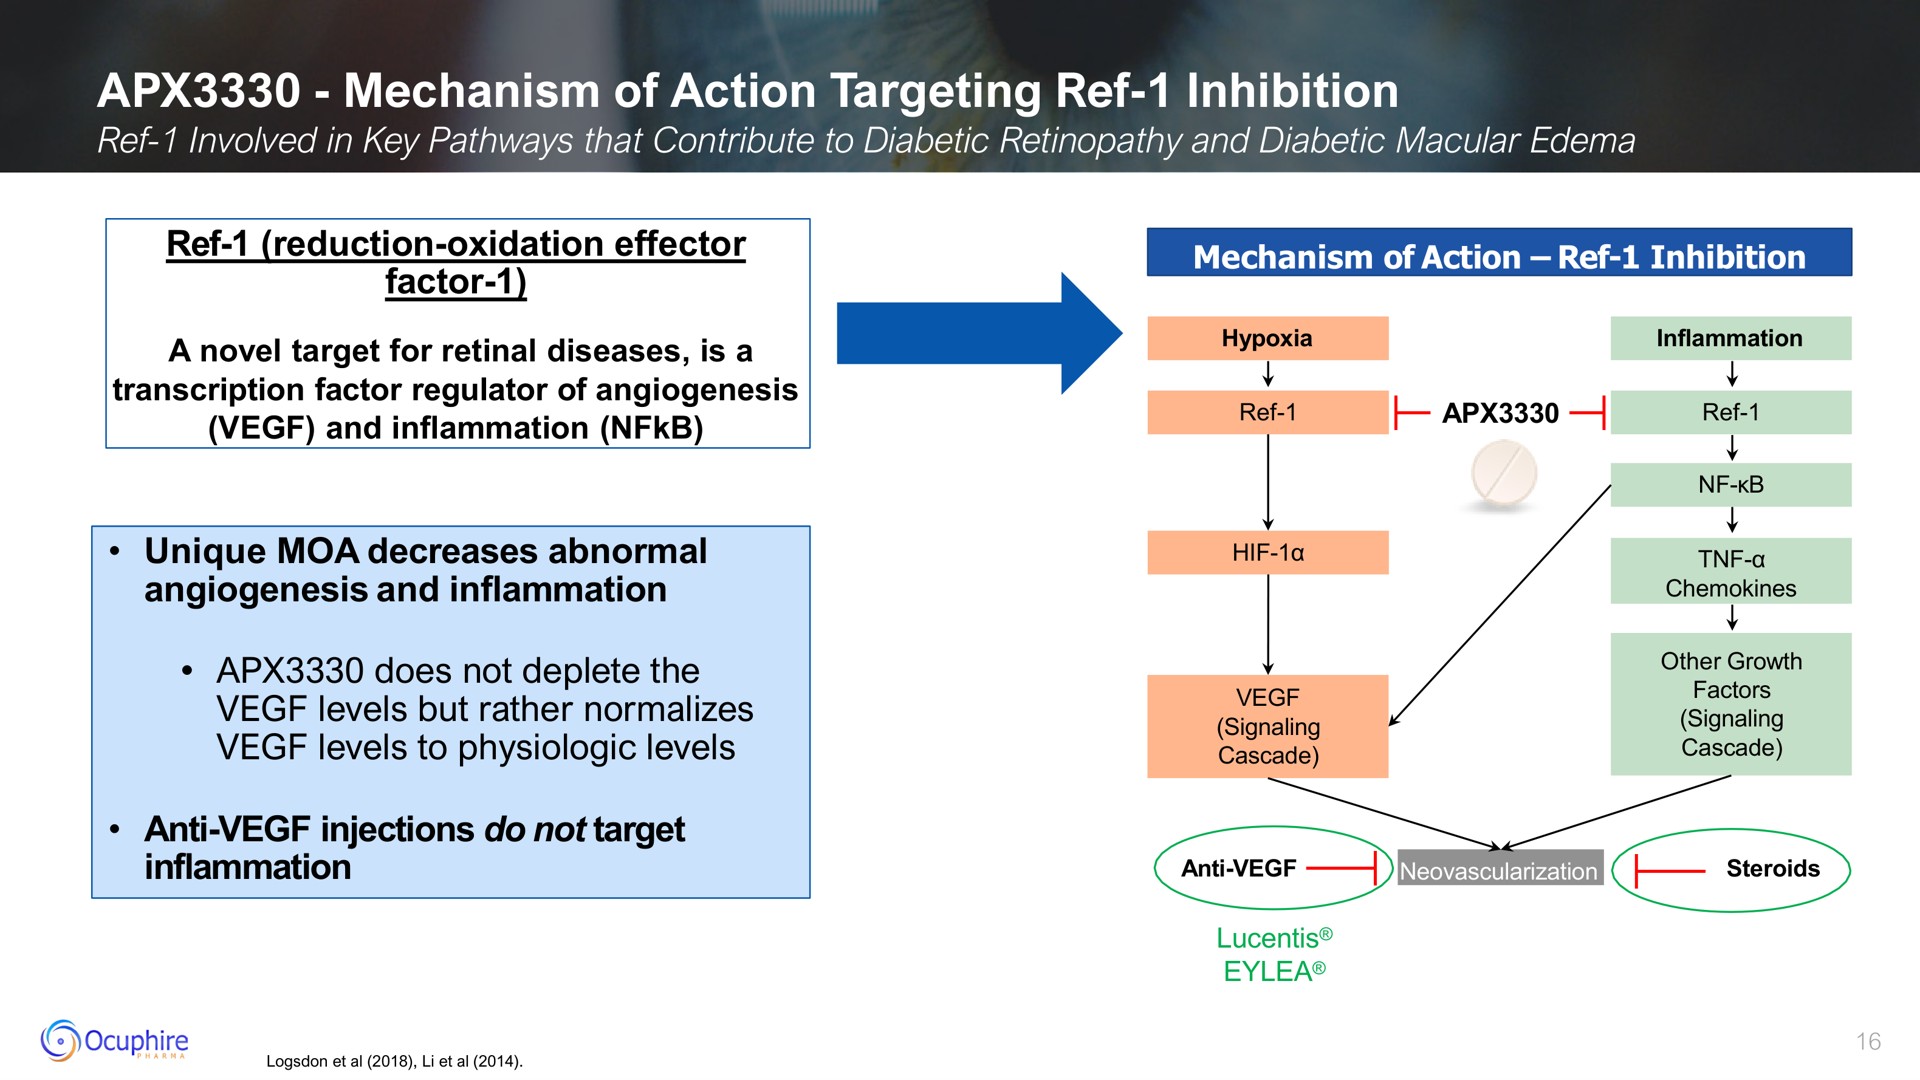 mechanism of action targeting ref inhibition and inflammation does not deplete the levels but rather normalizes anti injections do not target ace | Ocuphire Pharma